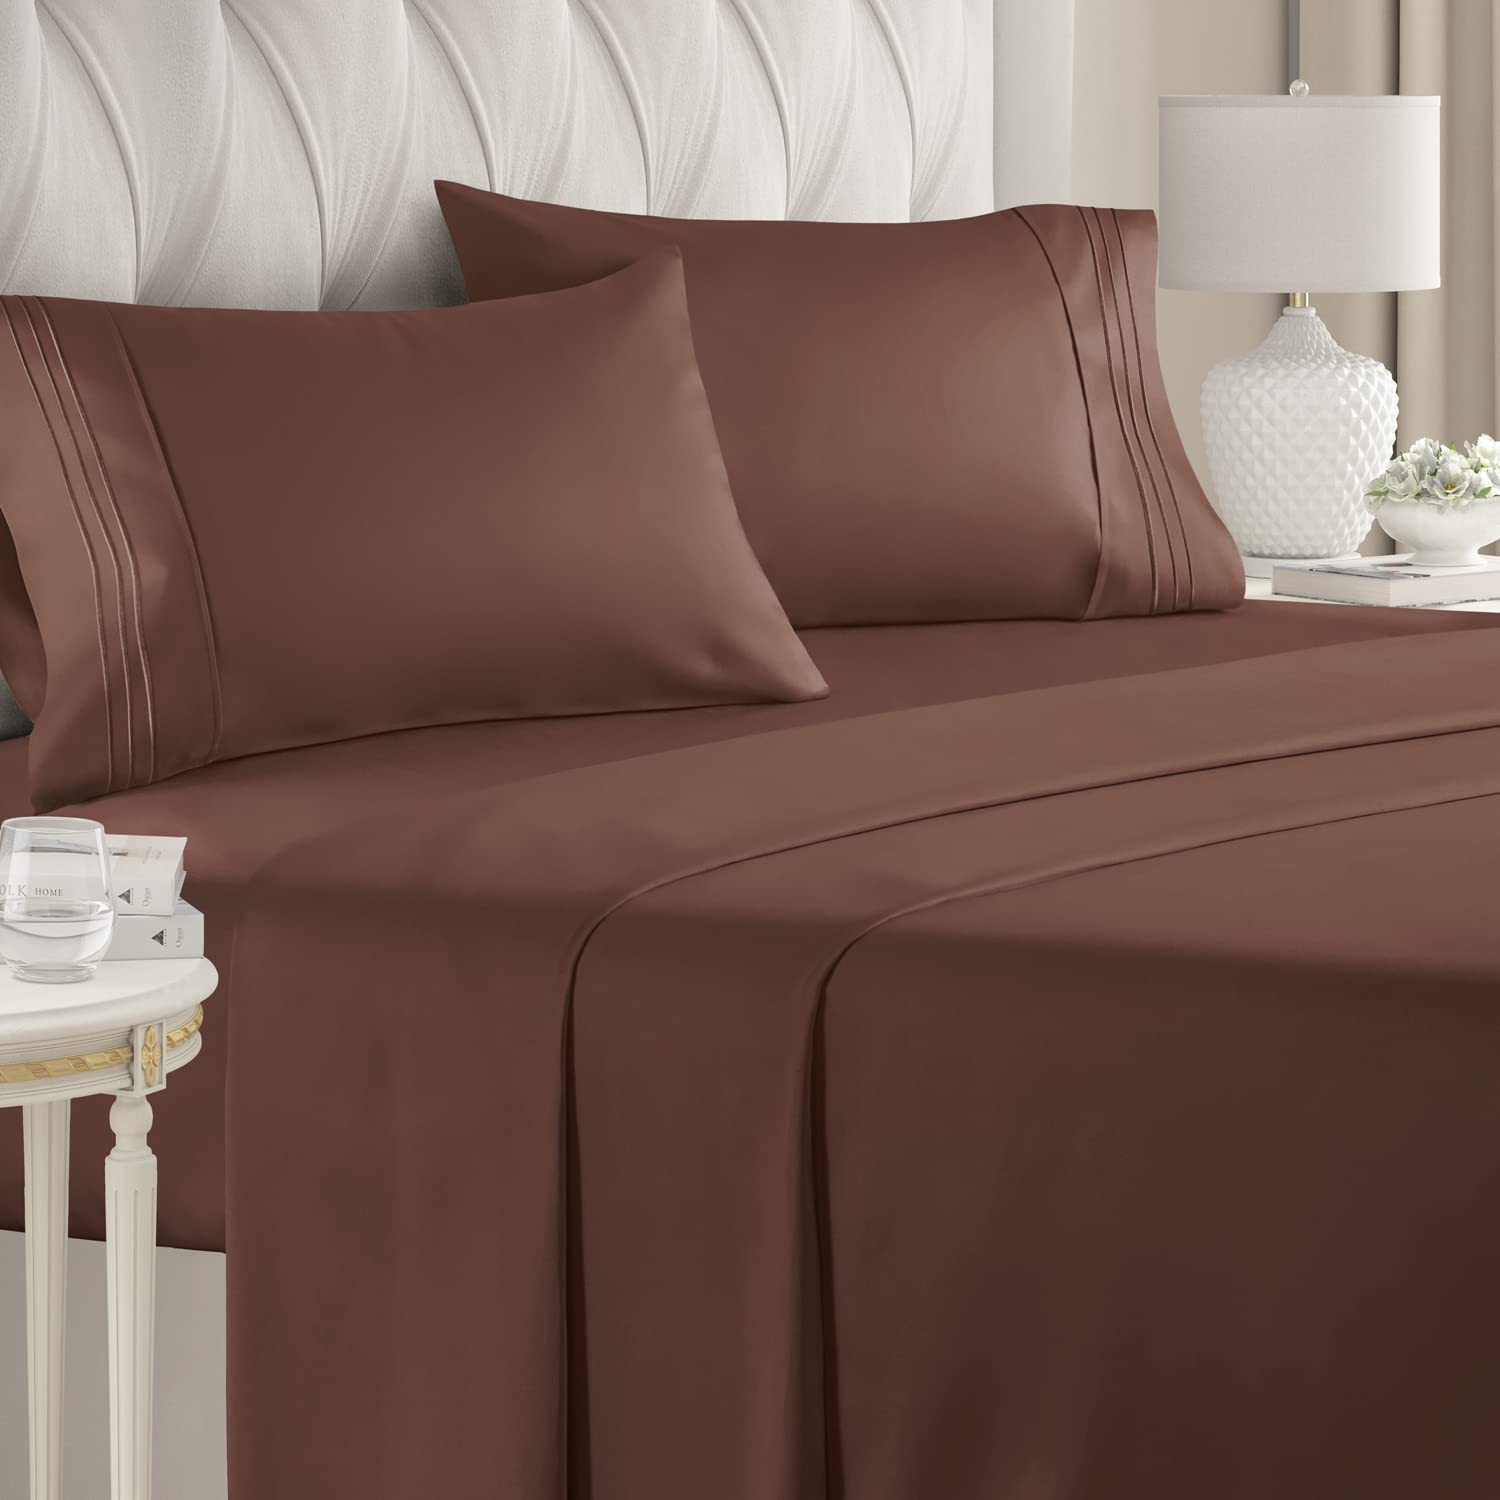 Buy Twin Size Flat Sheet Chocolate Egyptian Cotton 1000 Thread Count at- Egyptianhomelinens.com